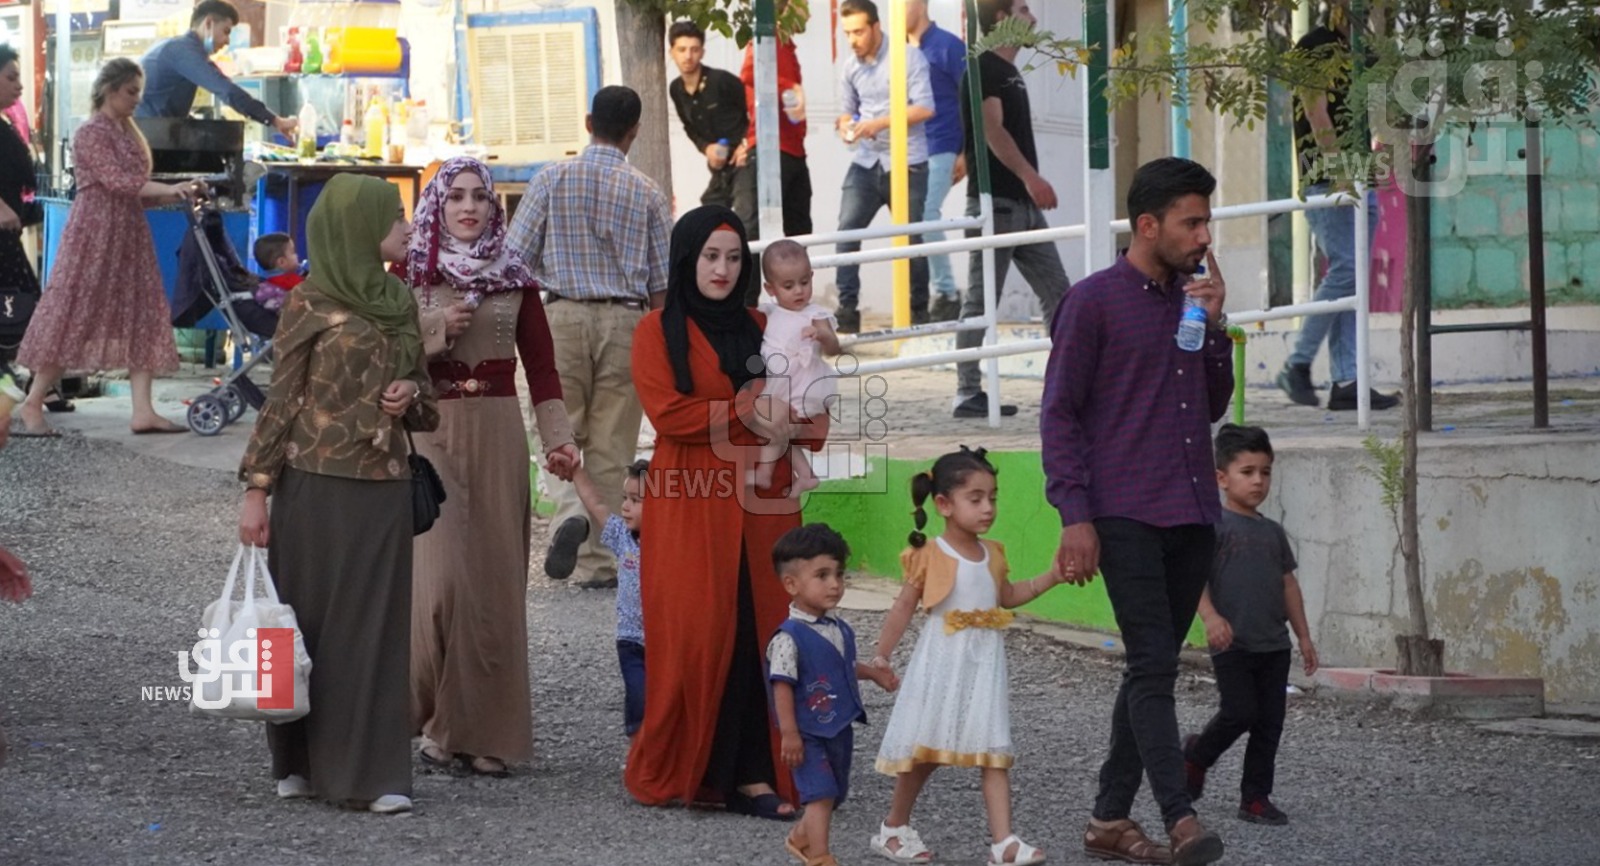 Erbil: 103169 tourists entered the governorate during Eid